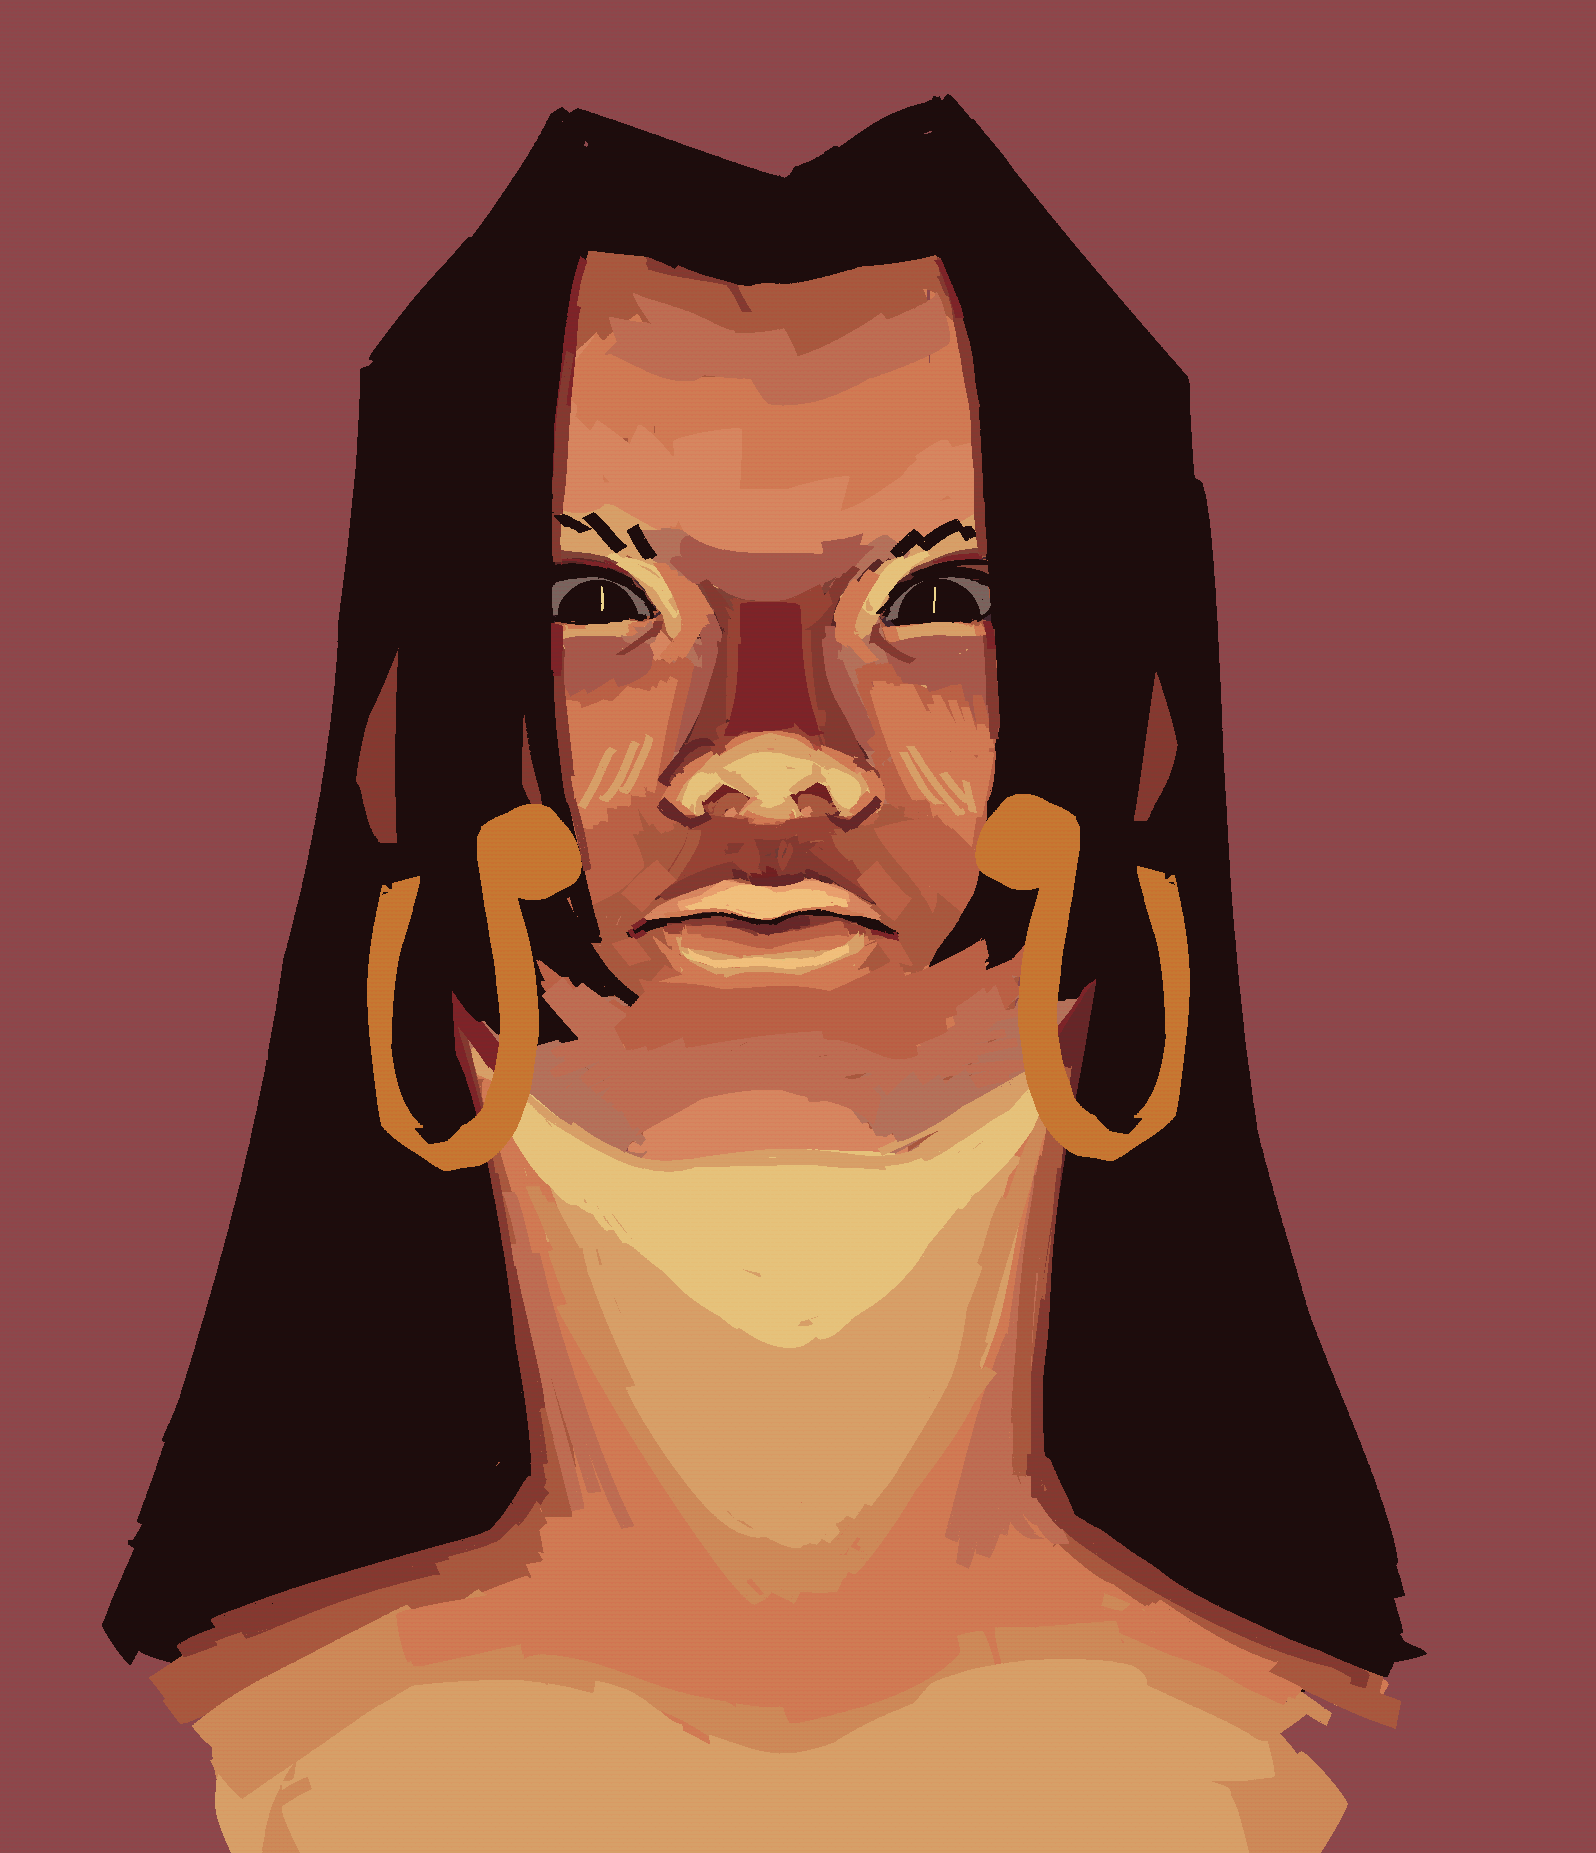 A digital portrait of Boa Hancock from One Piece. She is dramatically lit from below and is looking down at the viewer imposingly. The piece is largely pink to yellow tones and has blocky rendering. 